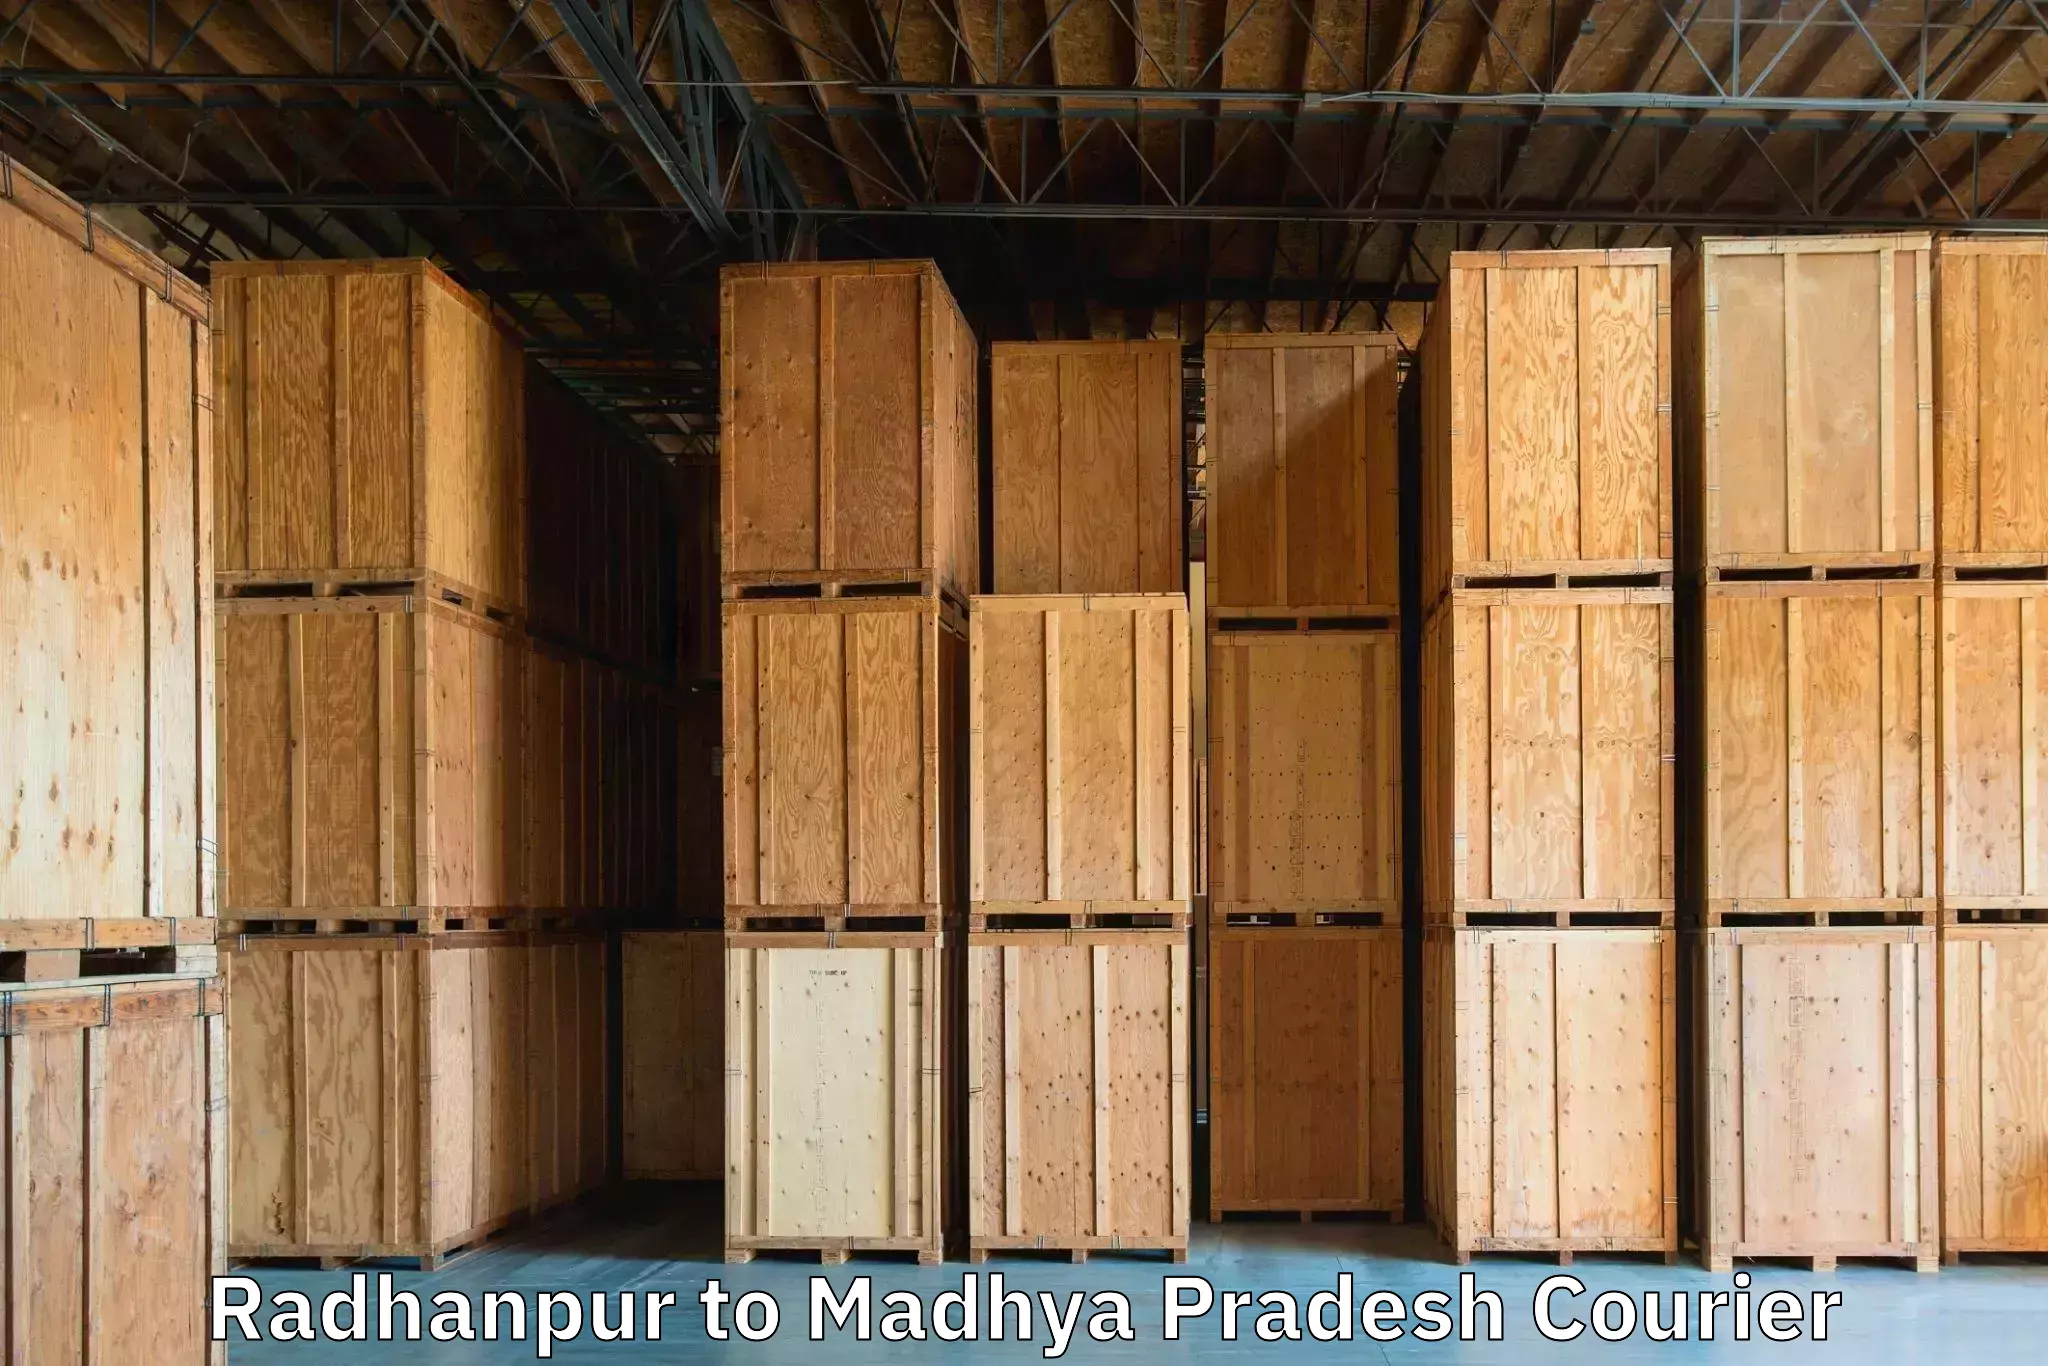 Baggage shipping schedule in Radhanpur to Jabalpur